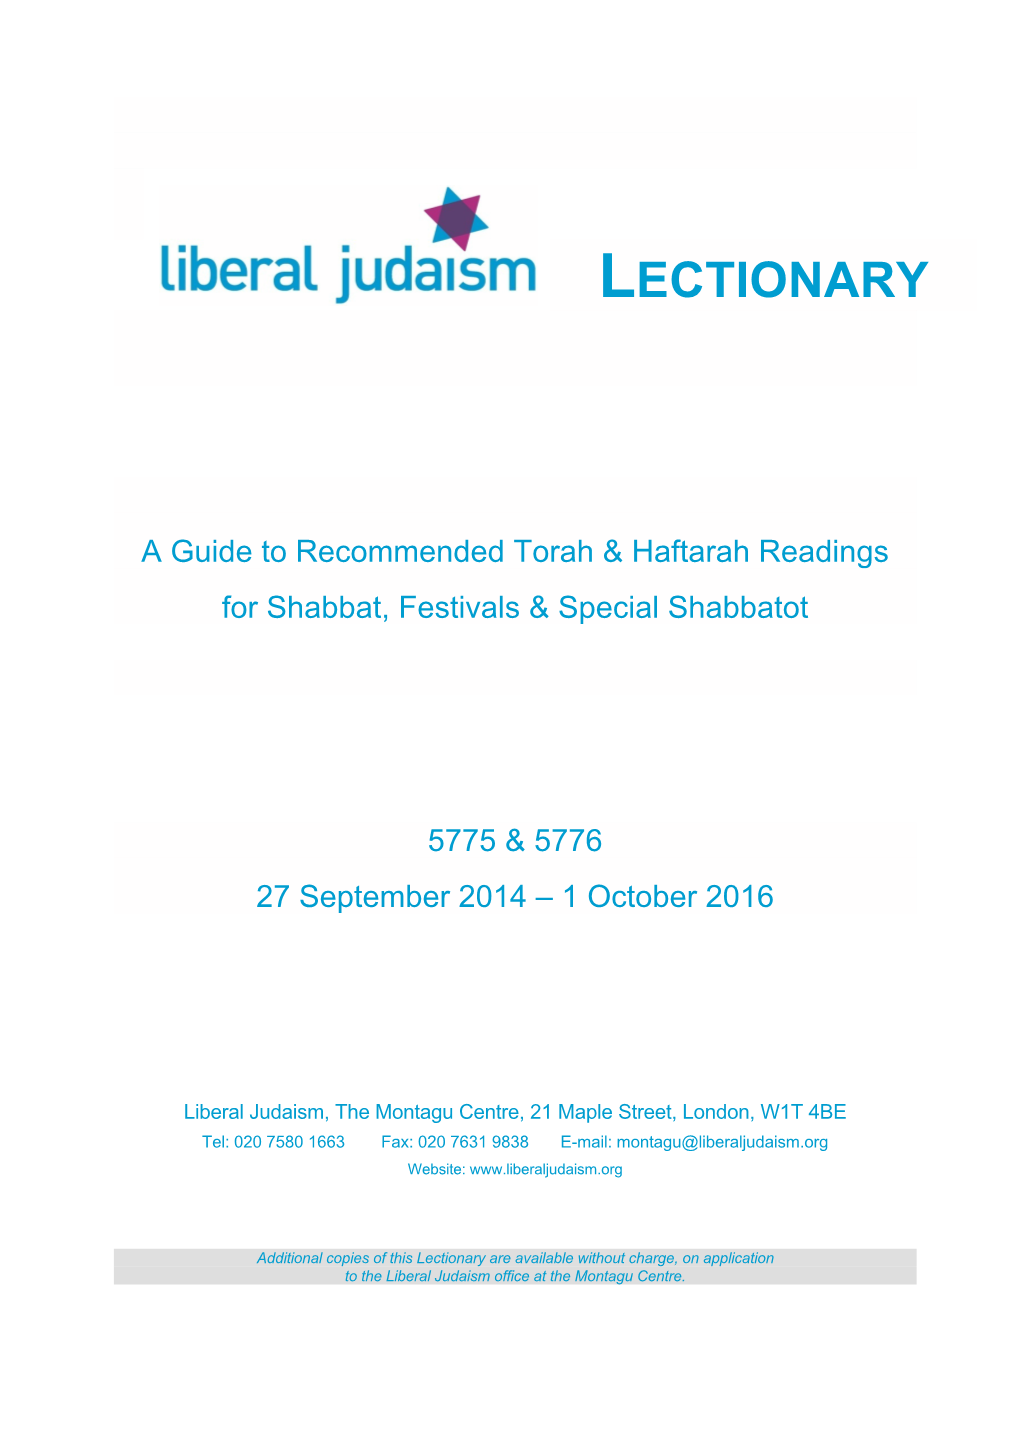 Liberal Judaism Lectionary 5775 & 5776